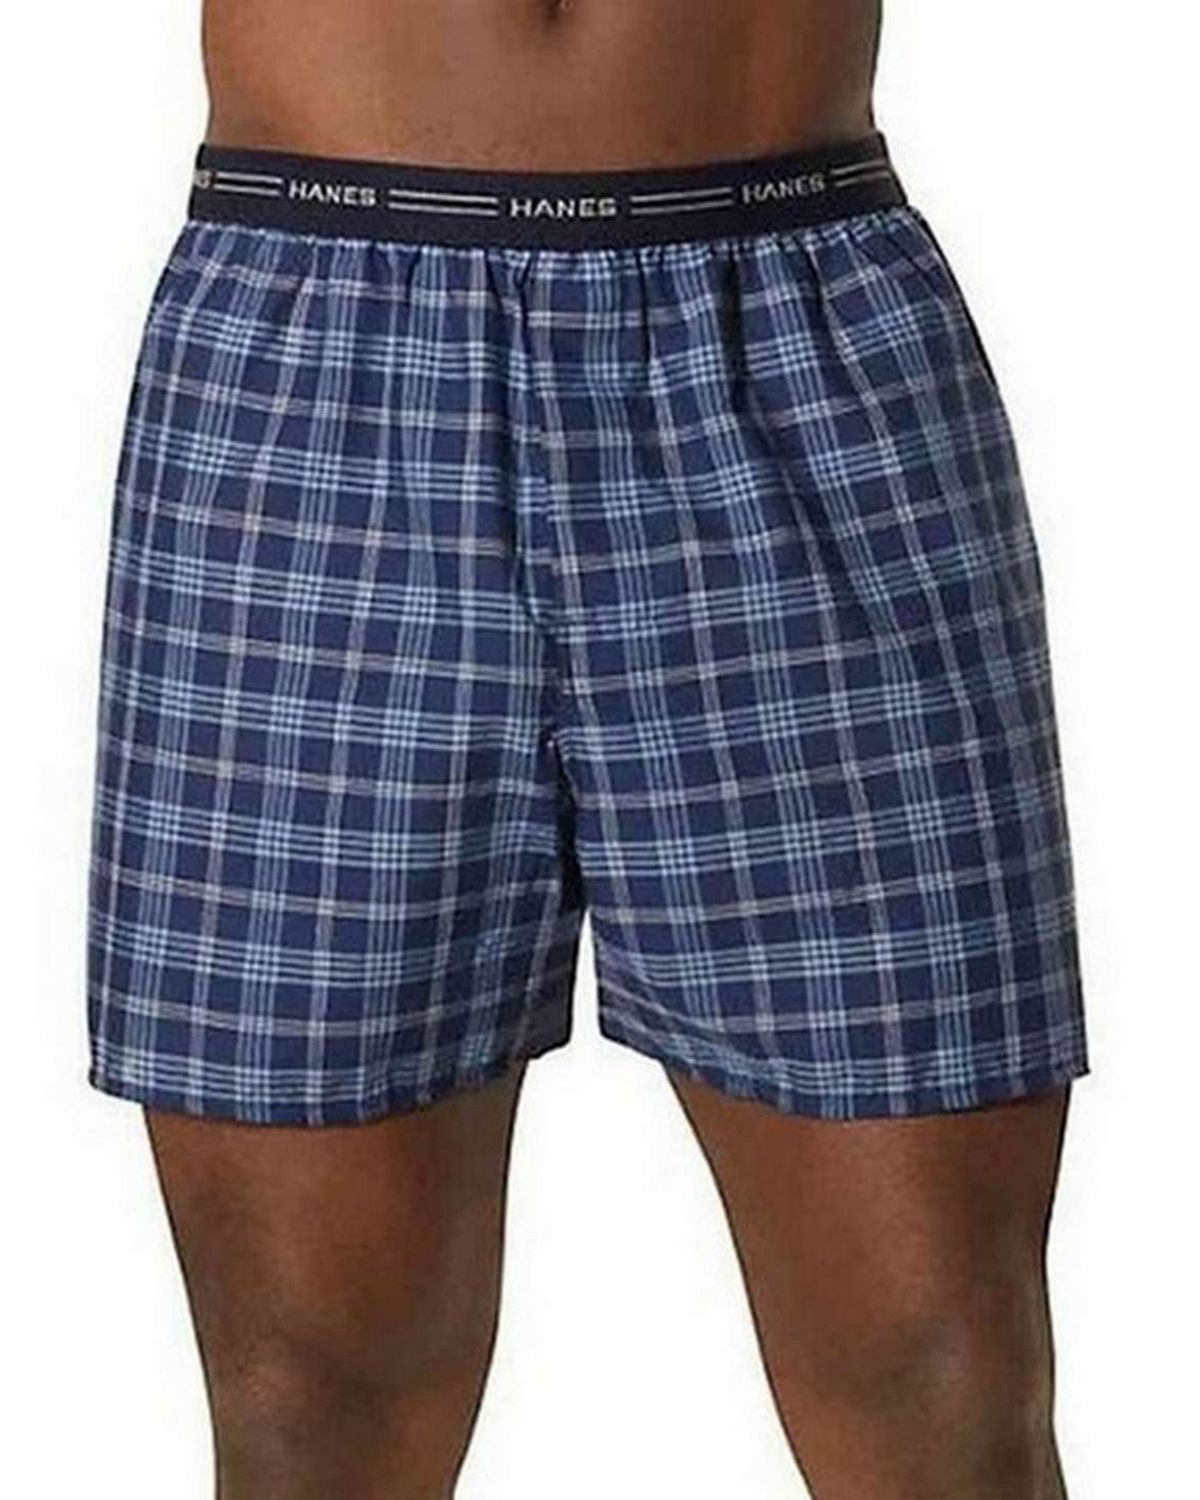 Hanes 841BX5 Mens Yarn Dyed Plaid Boxers (Pack of 5)